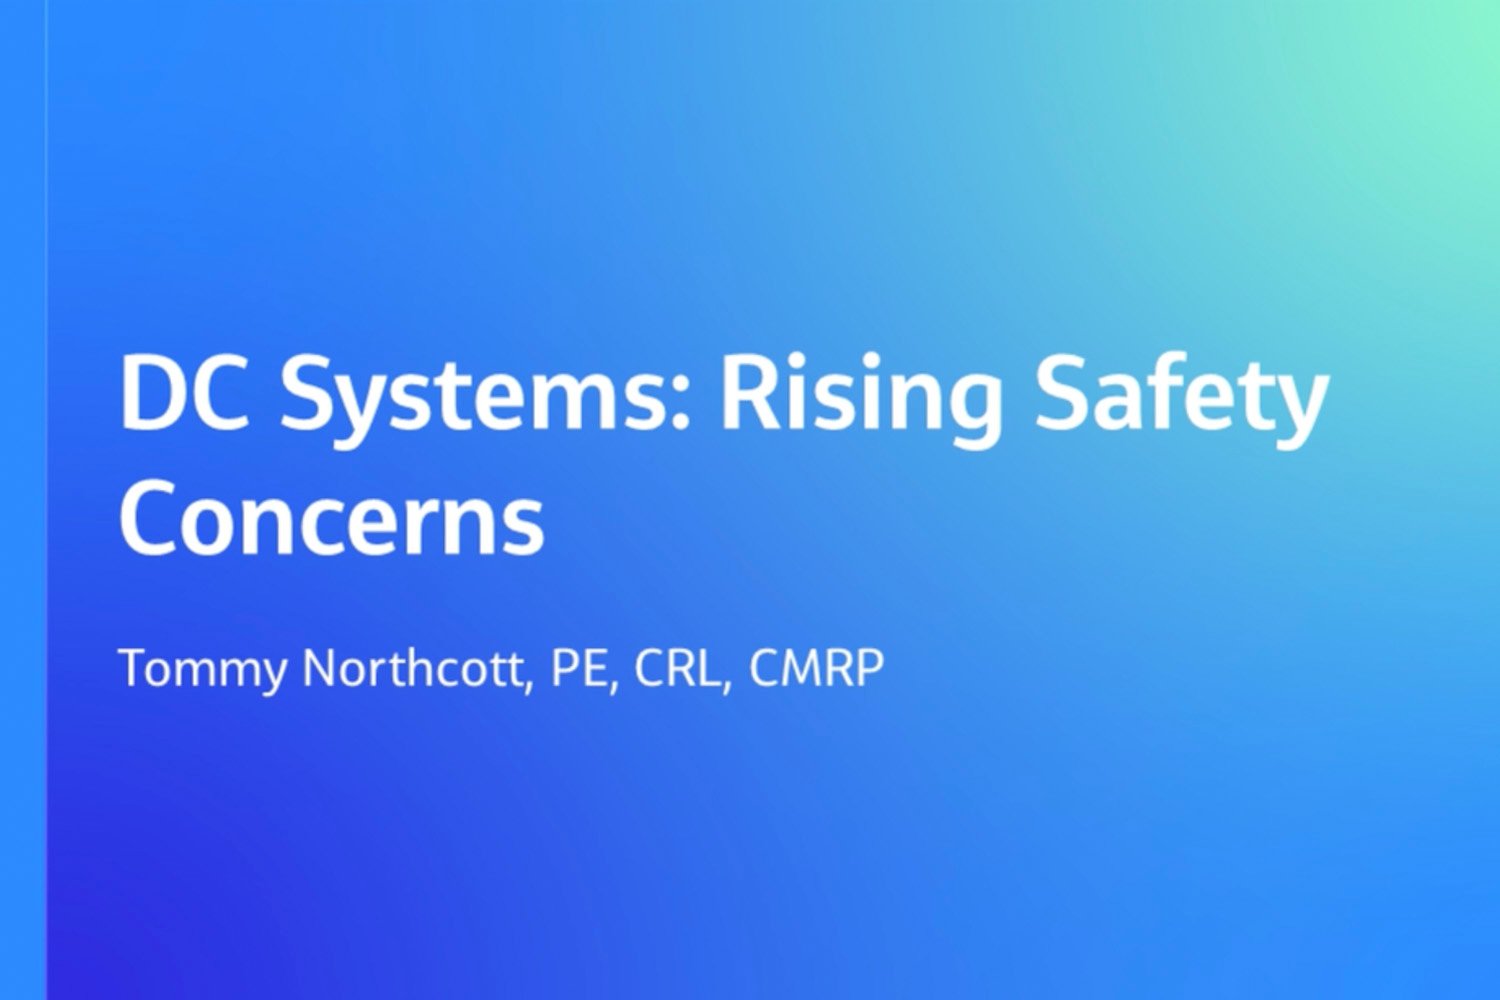 Cover for webinar presentation: “DC Systems: Rising Safety Concerns”